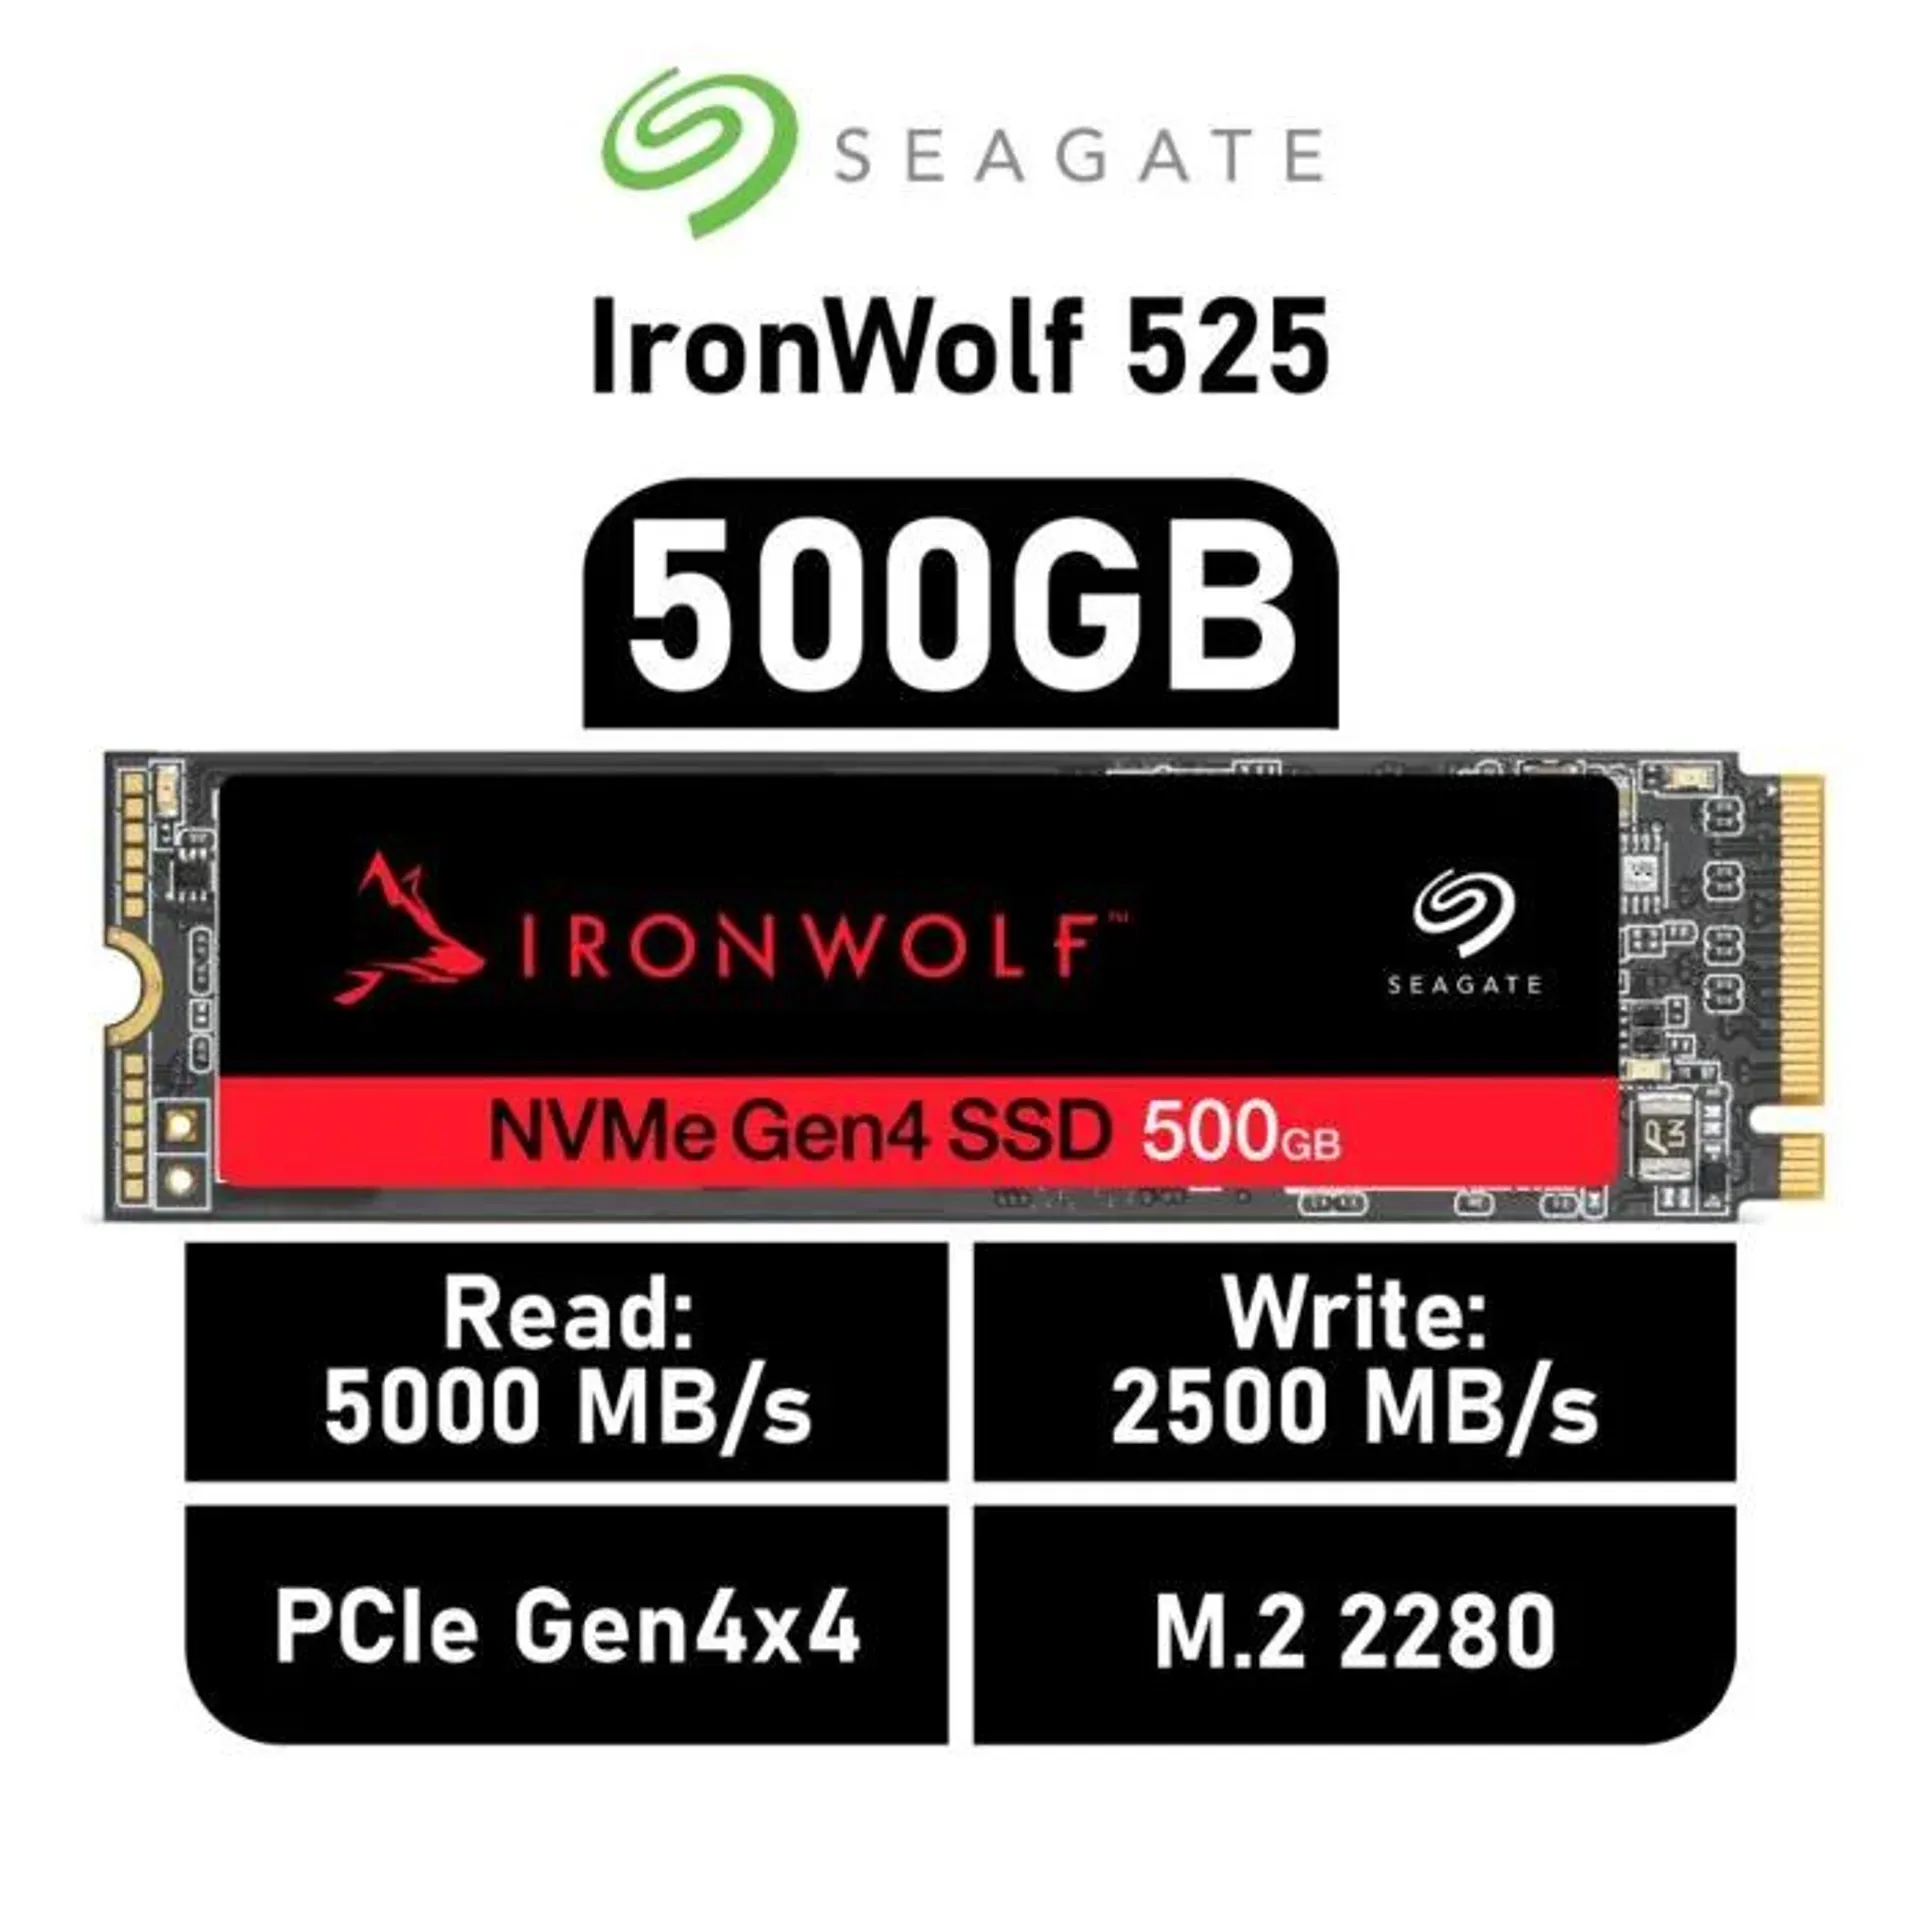 Seagate IronWolf 525 500GB PCIe Gen4x4 ZP500NM3A002 M.2 2280 Solid State Drive